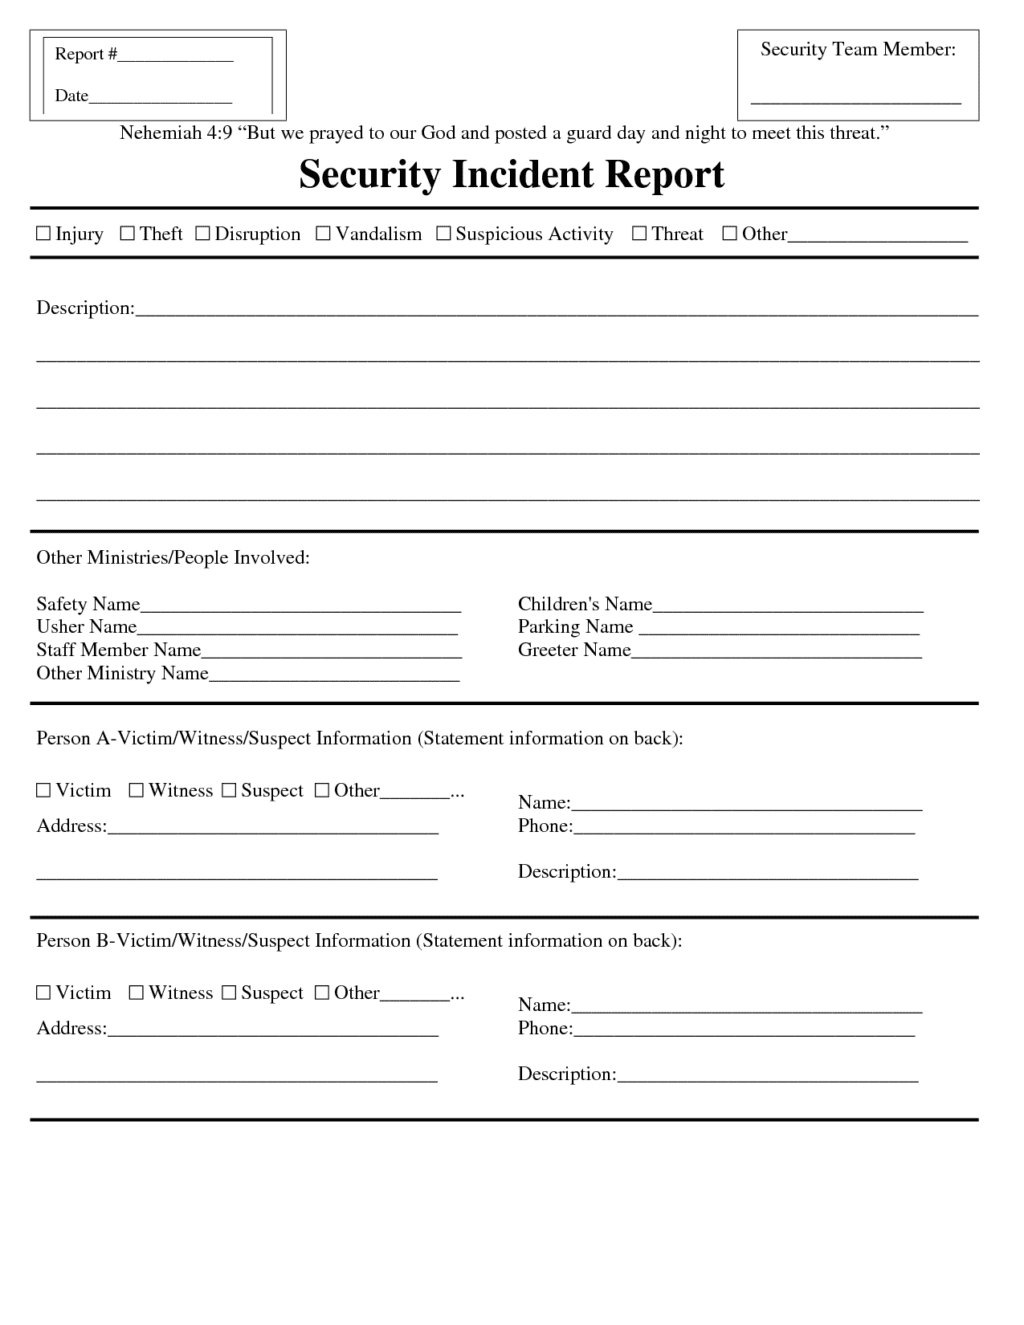 Incident Report Sample Letter And Physical Security Incident Report Template